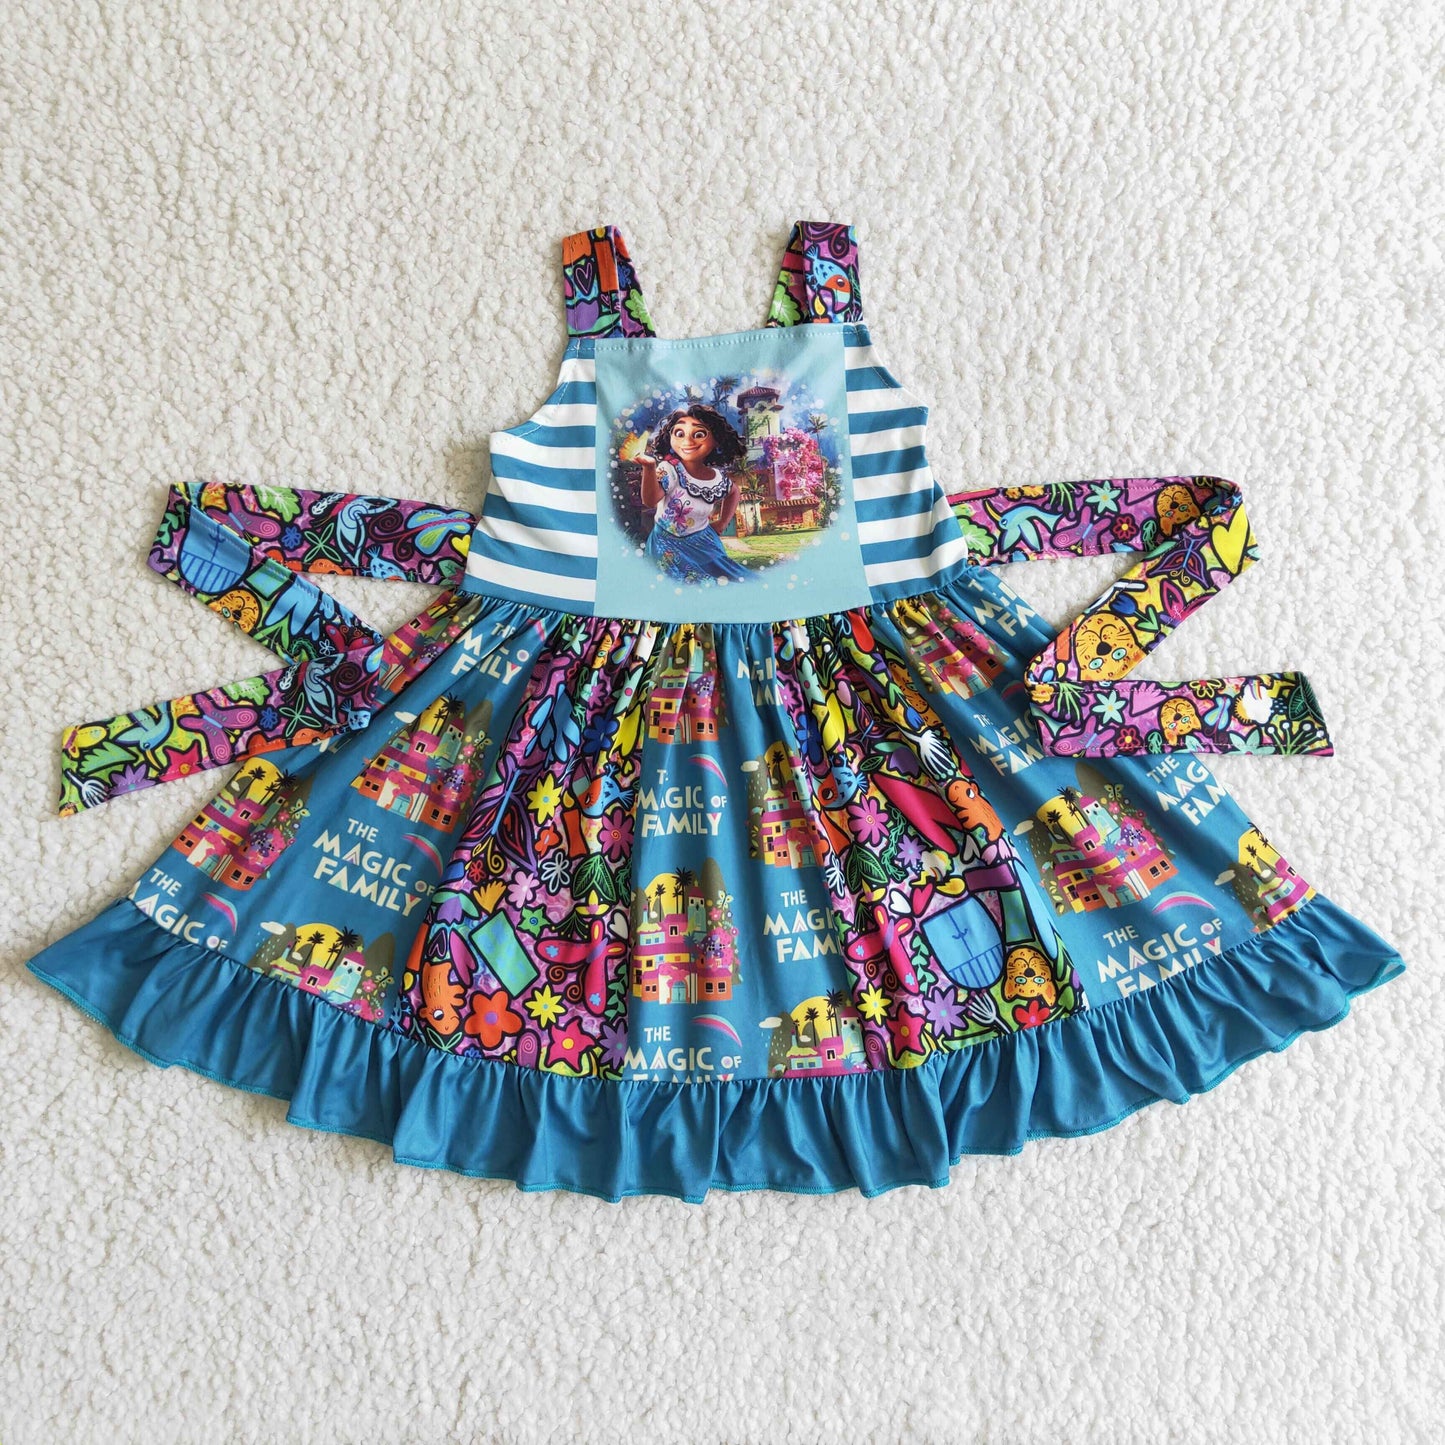 kids clothing dress the magic of family